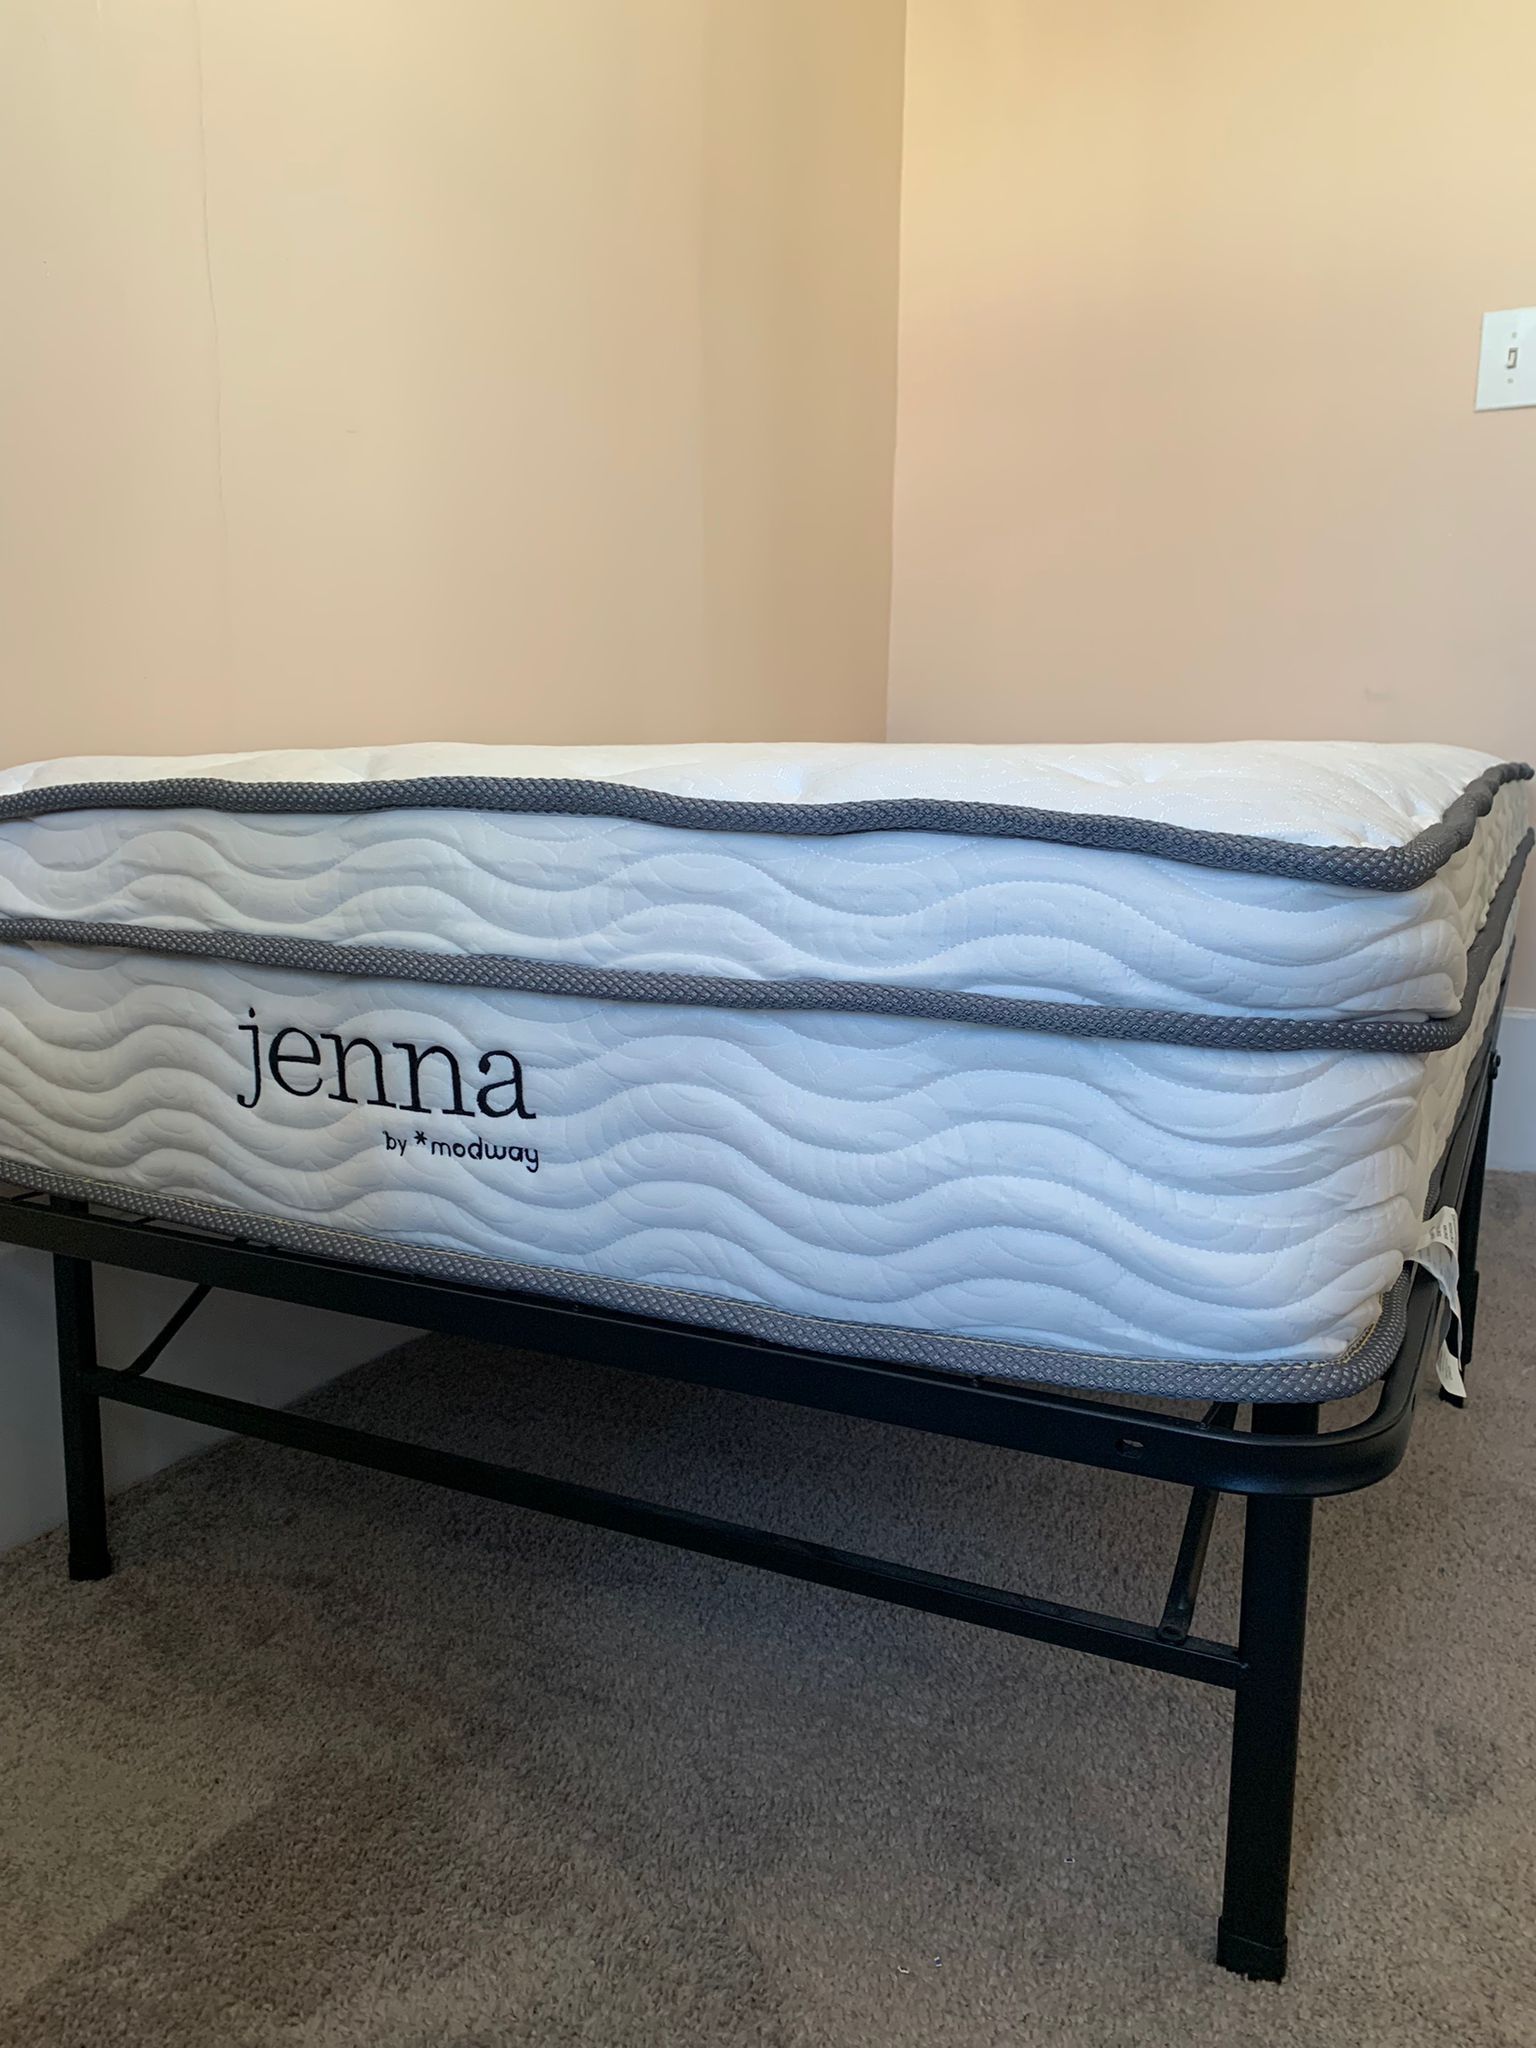 Twin Guest Bed Mattress And Frame Like New